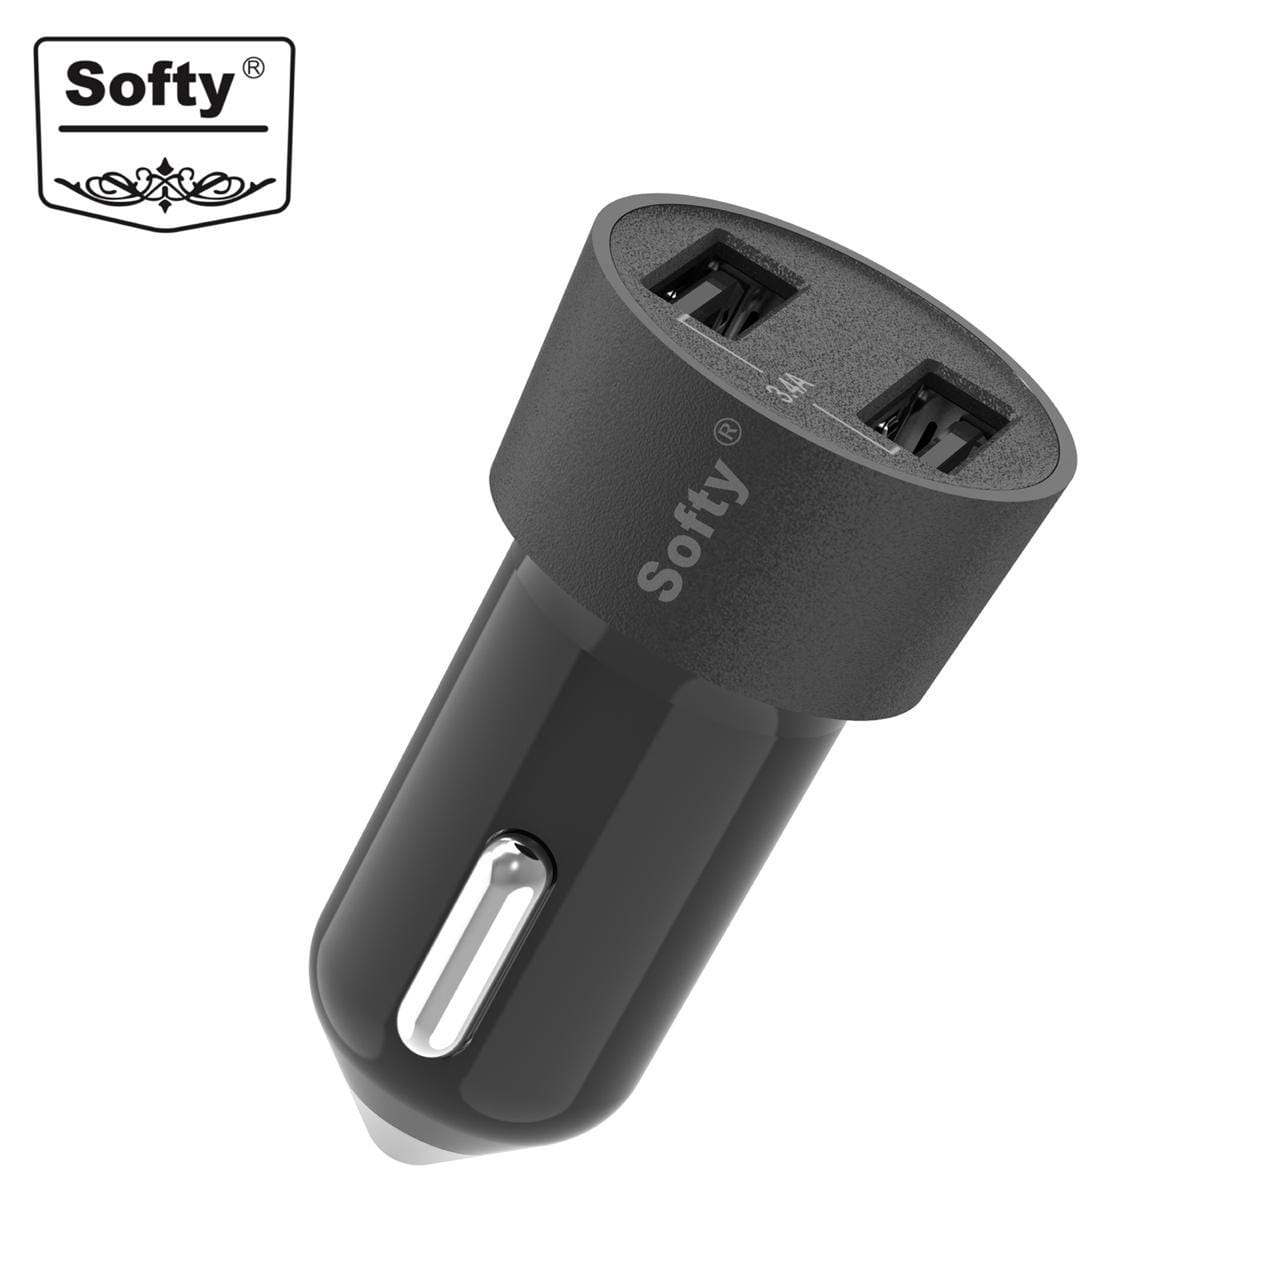 Softy premium quality 3.4 Amp Dual USB car charger-USB CAR CHARGERS-dealsplant